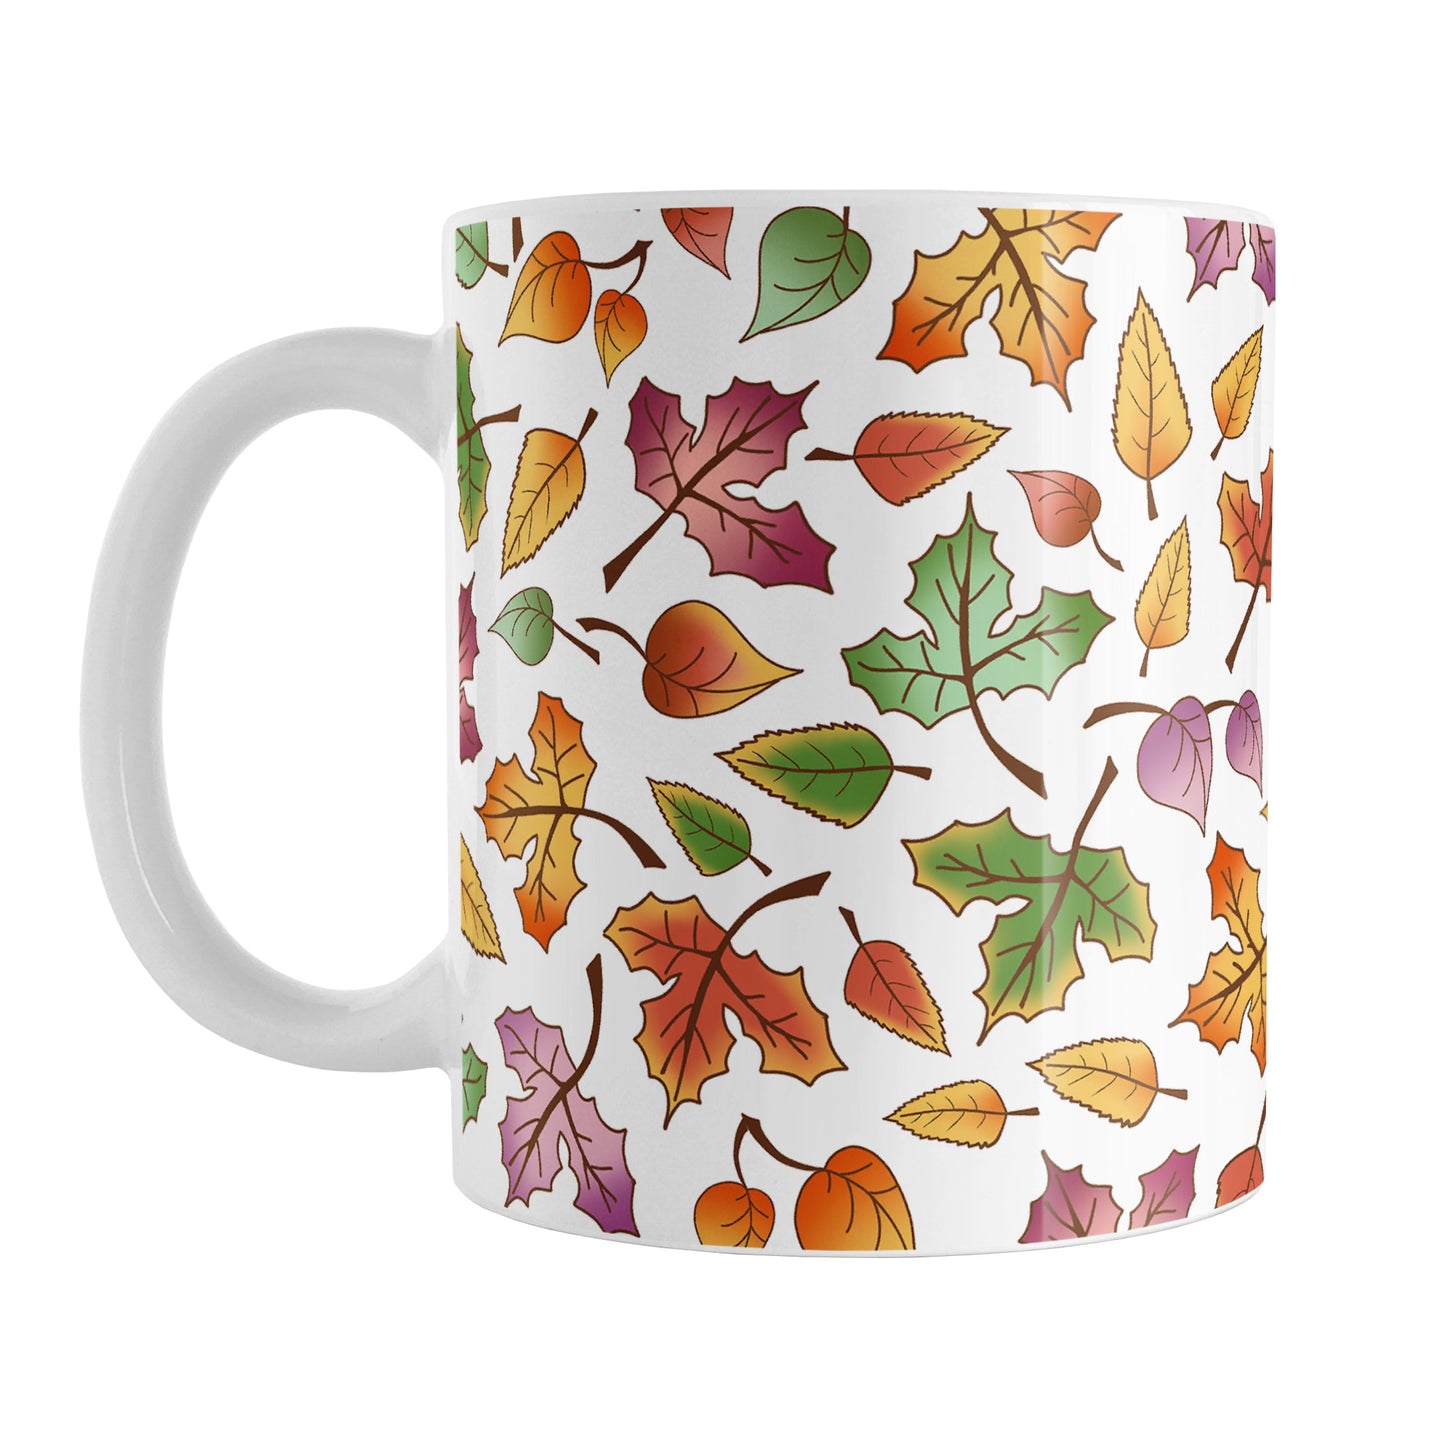 Changing Leaves Fall Mug (11oz) at Amy's Coffee Mugs. A ceramic coffee mug designed with a fall themed pattern of leaves changing colors, as they do at the beginning of autumn, that wraps around the mug.